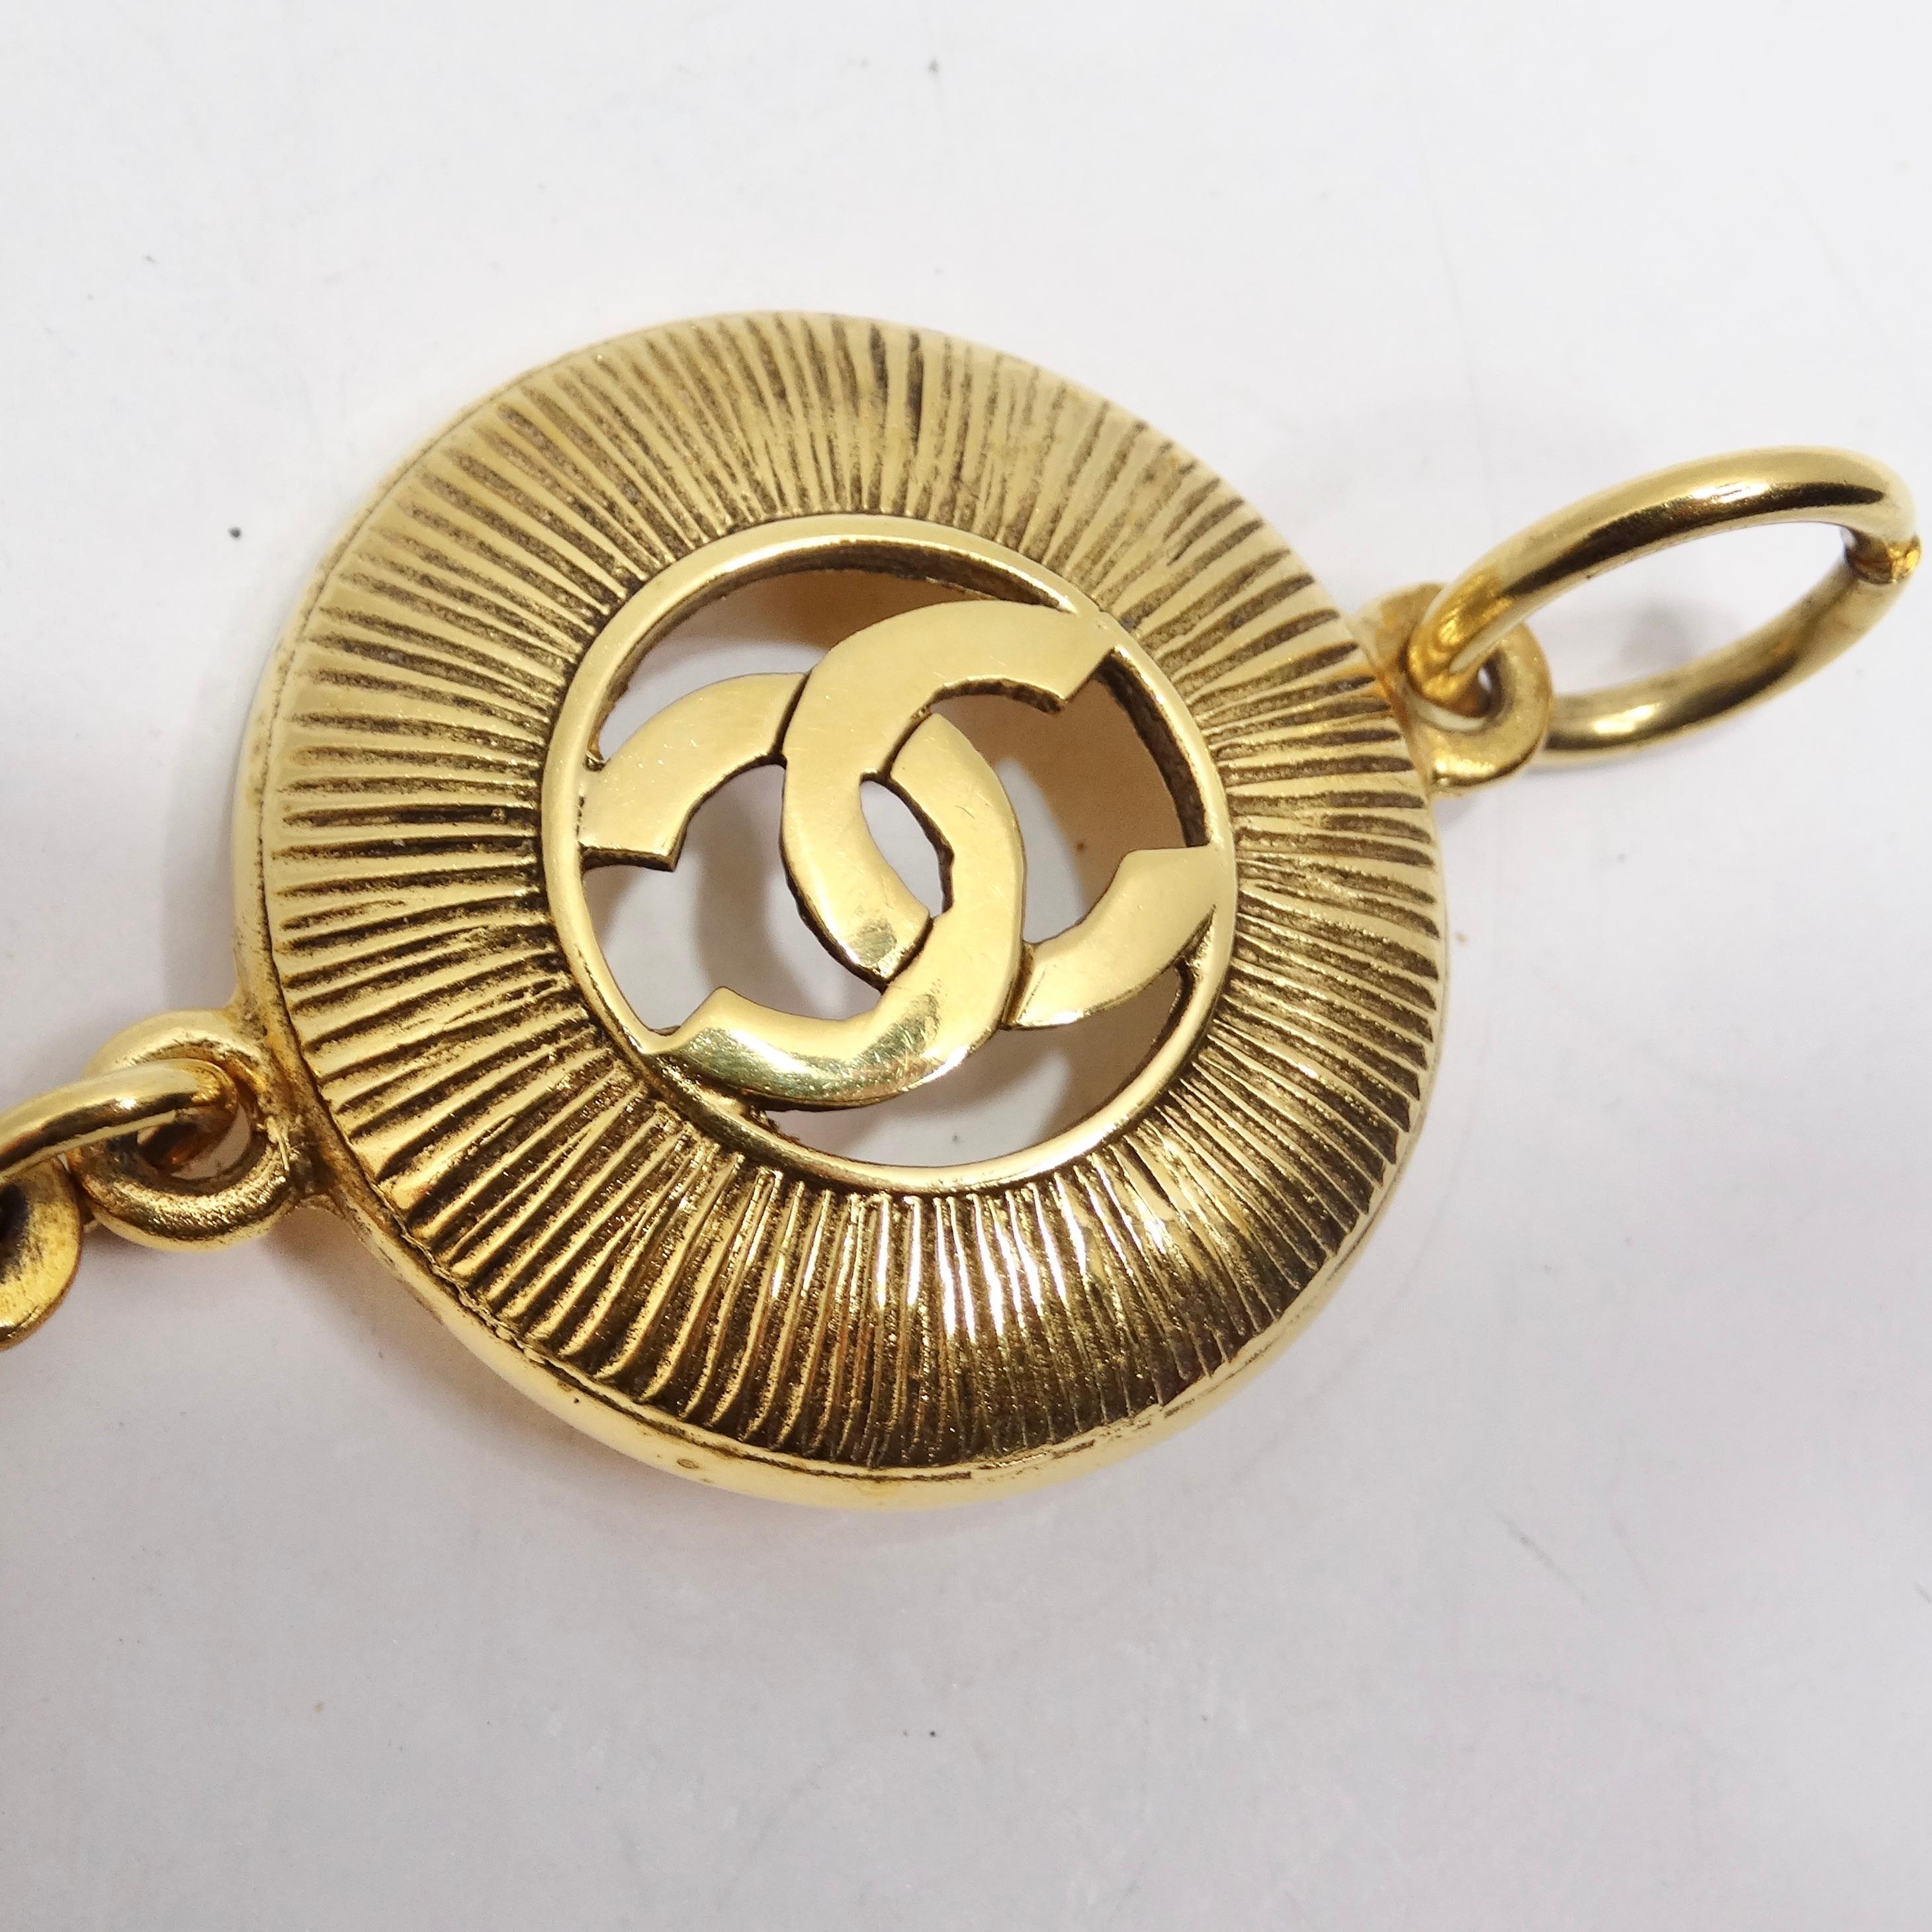 Do not miss out on this classic and elegant piece from the 1980s, the Chanel Gold Metal Medallion Coin CC Link Bracelet. This bracelet features four gold-plated sunburst charms, each adorned with the signature Chanel interlocking 'C' logos at the